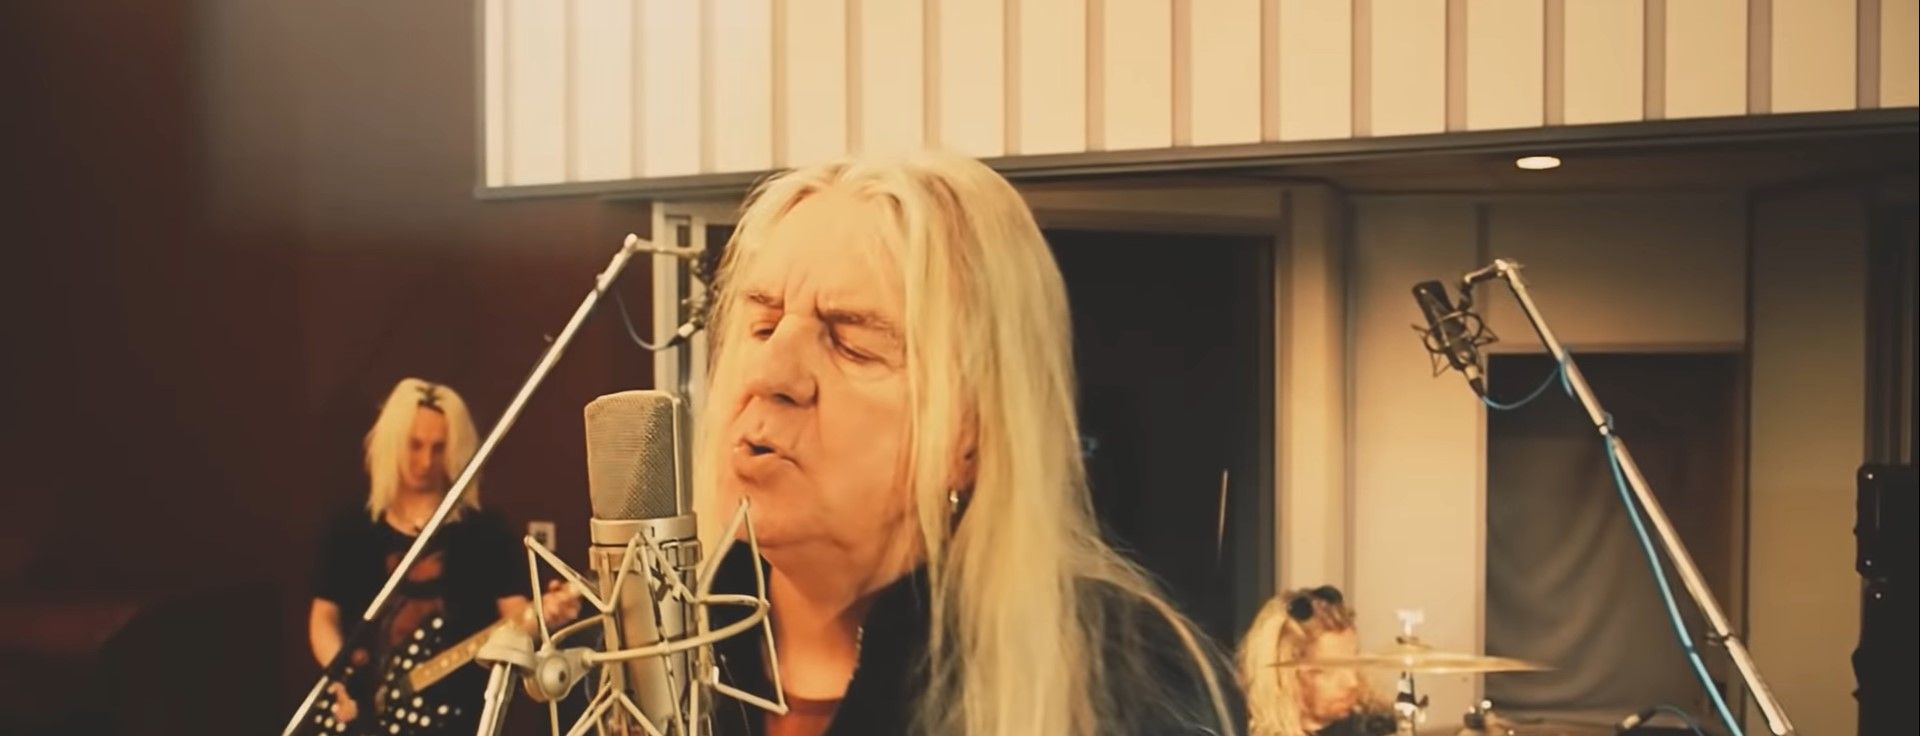 Biff Byford - Me And You (Official)